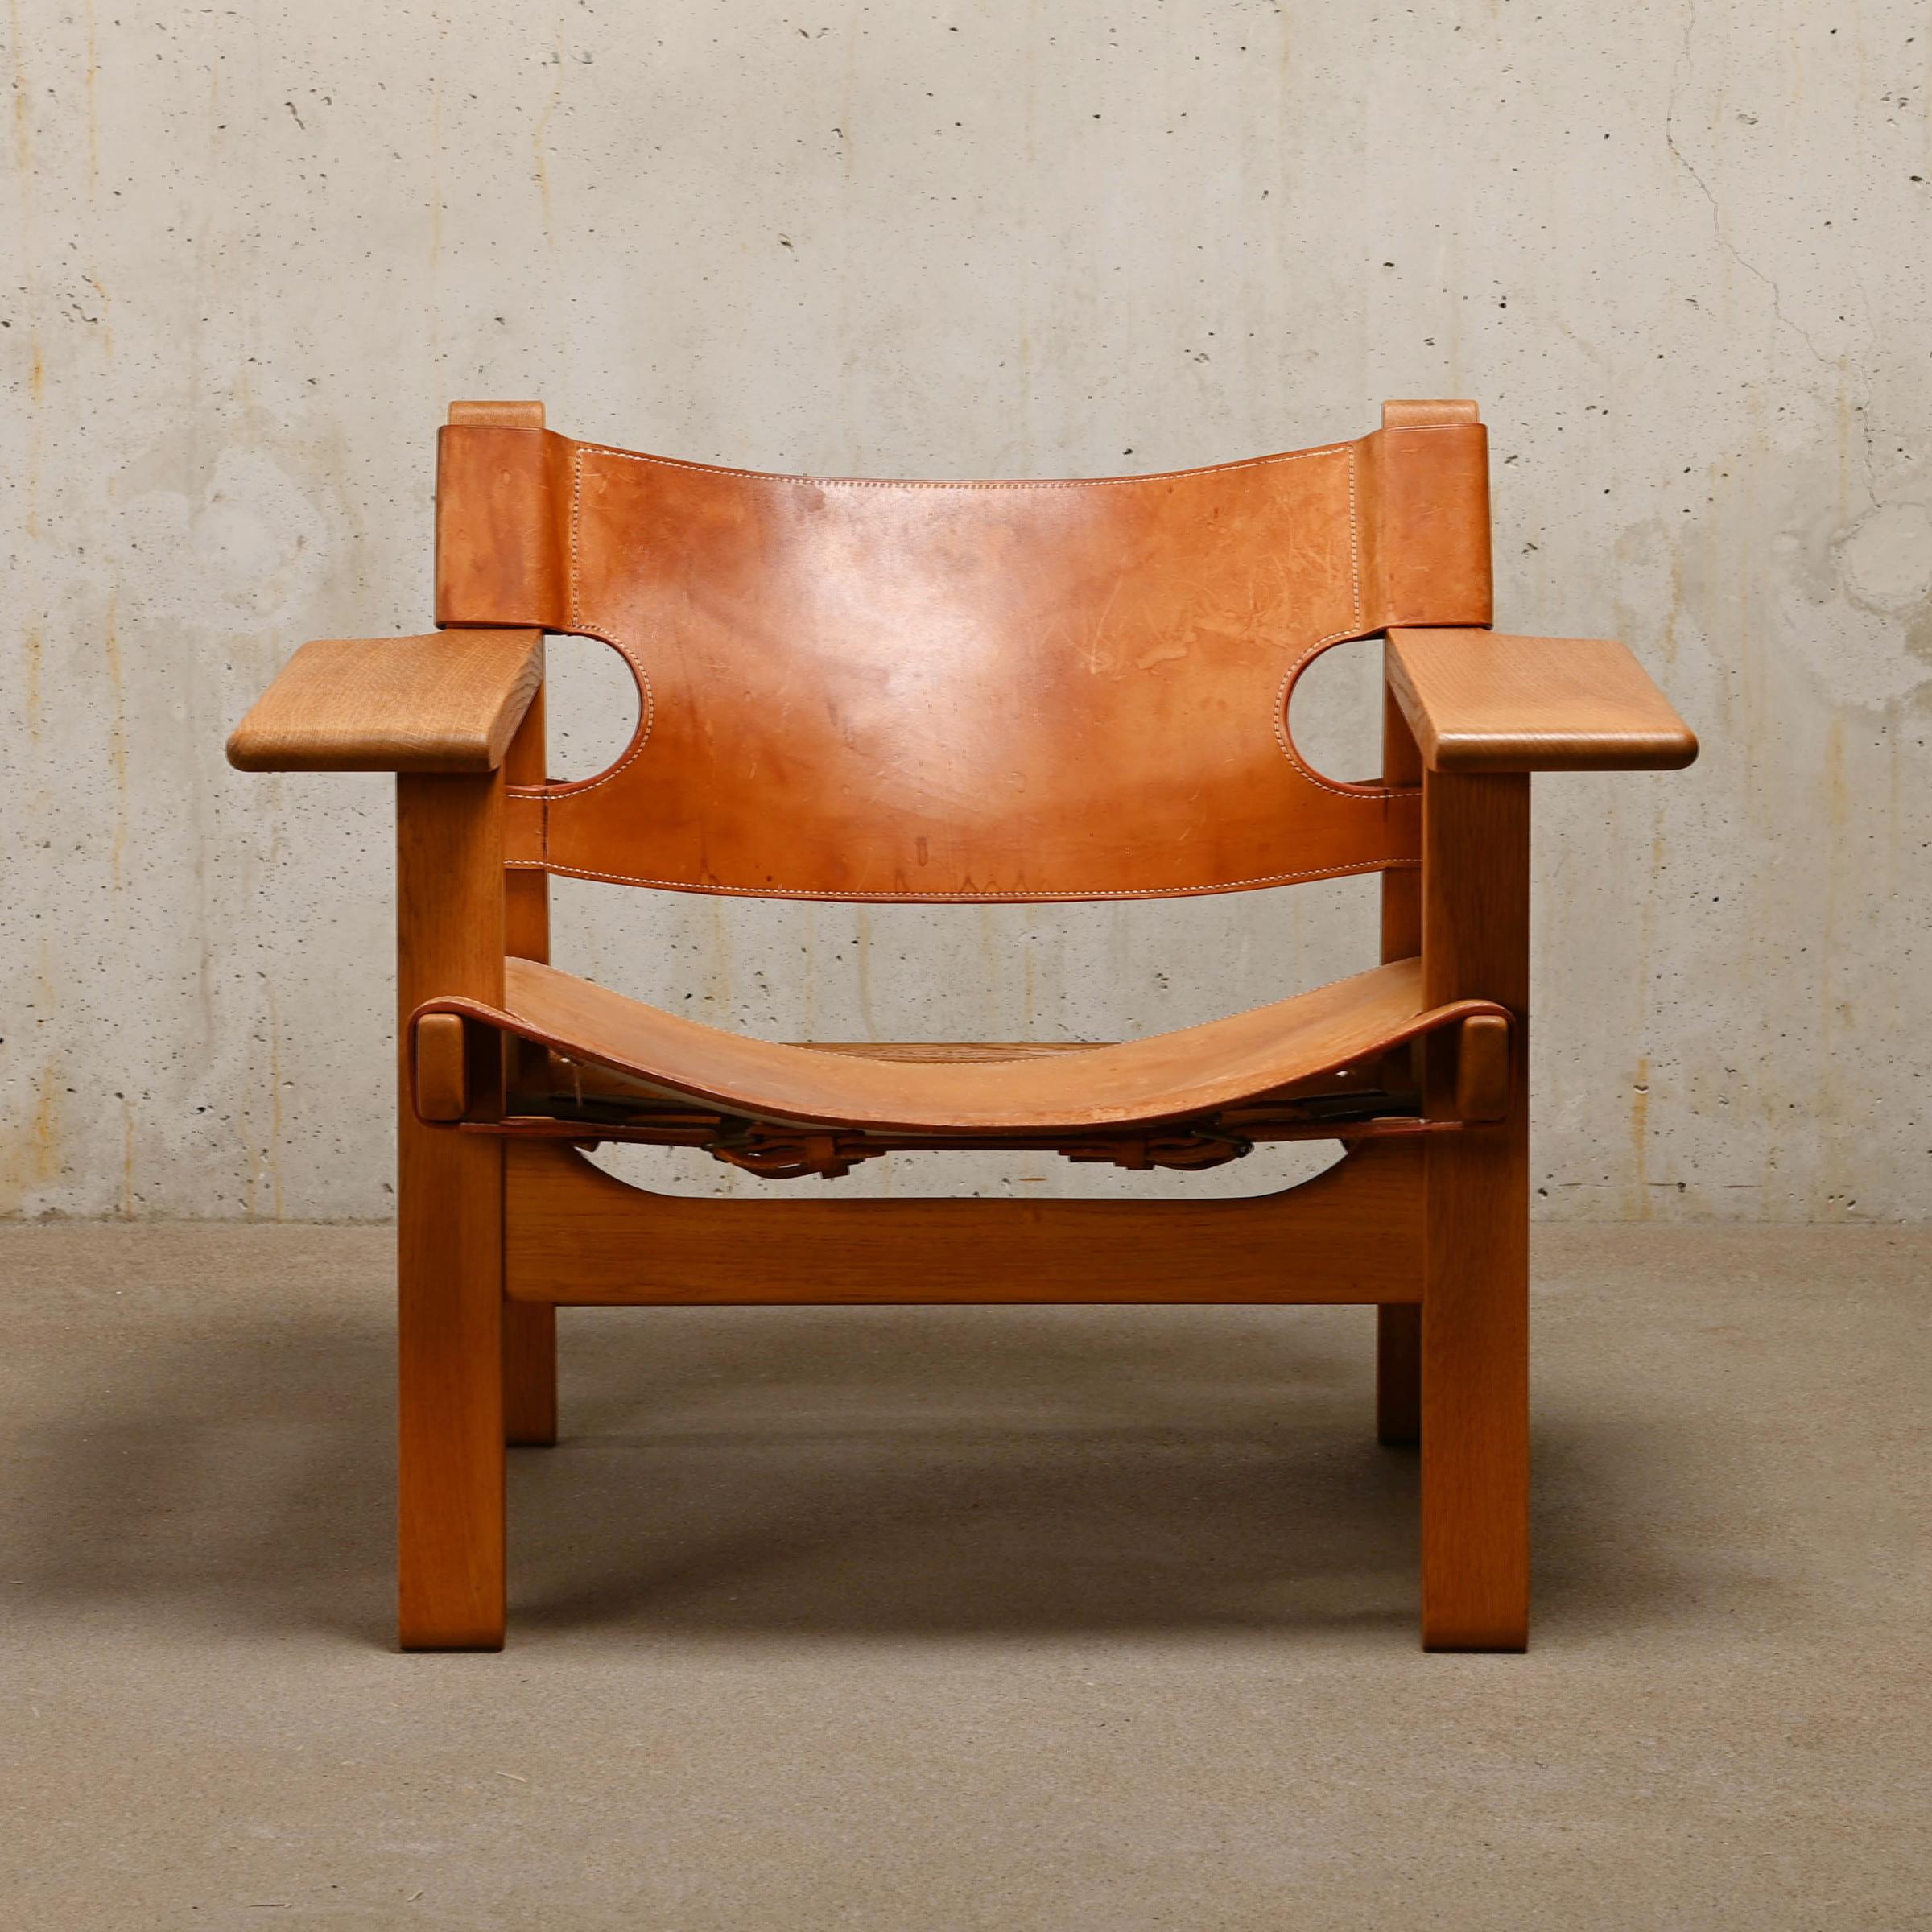 Iconic vintage Spanish chair by Børge Mogensen for Fredericia Stolefabrik, Denmark, 1958. Solid oak frame with cognac saddle leather all in very good vintage condition. Light traces of use with beautiful aged leather and wood.

Fantastic, simple